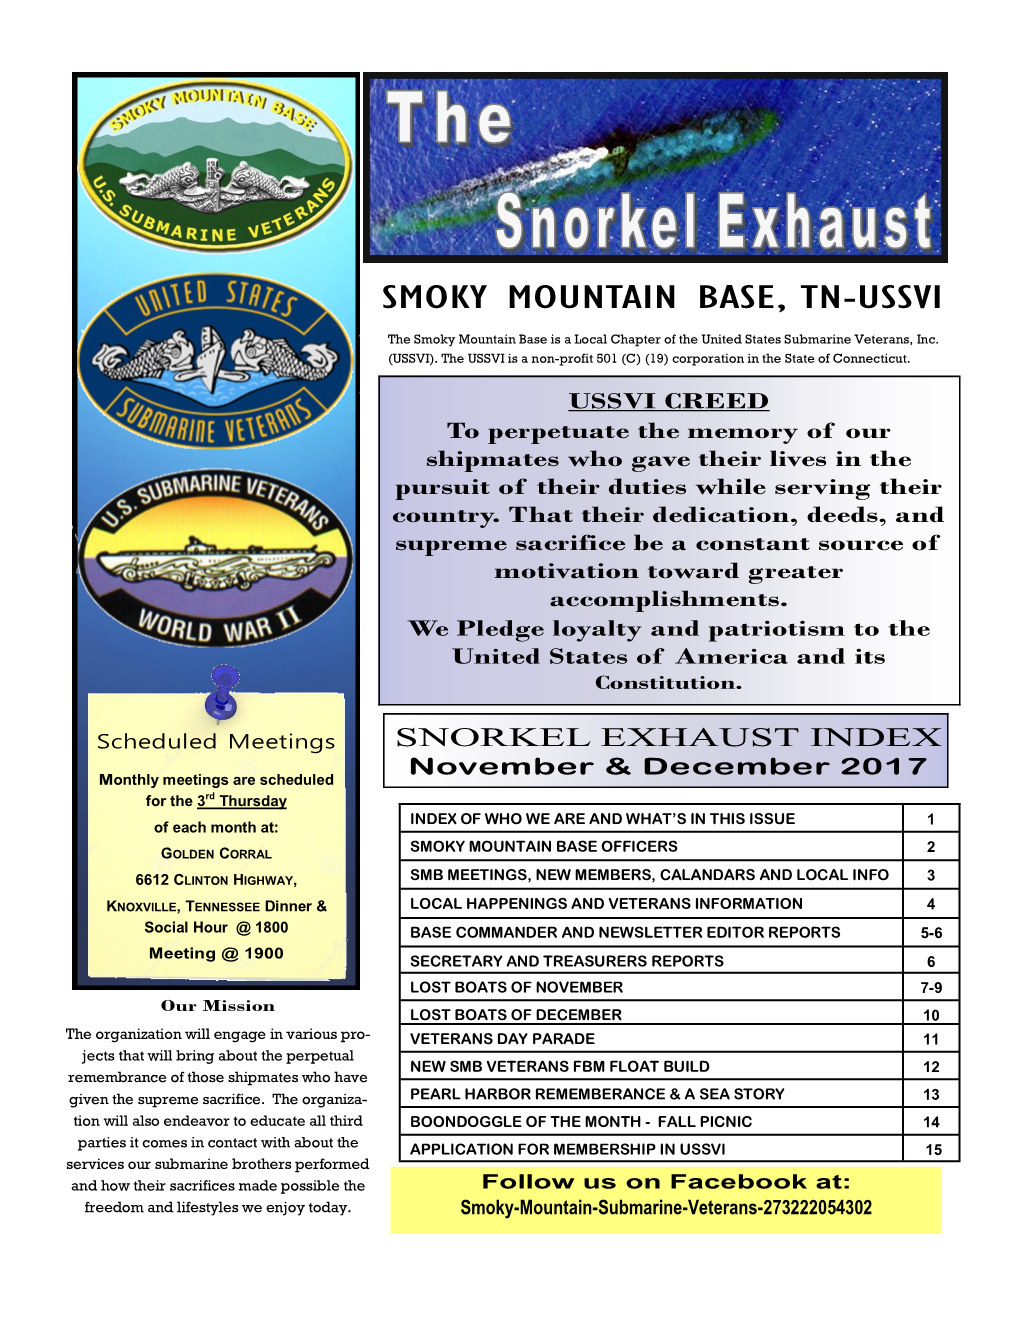 SMOKY MOUNTAIN BASE, TN-USSVI the Smoky Mountain Base Is a Local Chapter of the United States Submarine Veterans, Inc